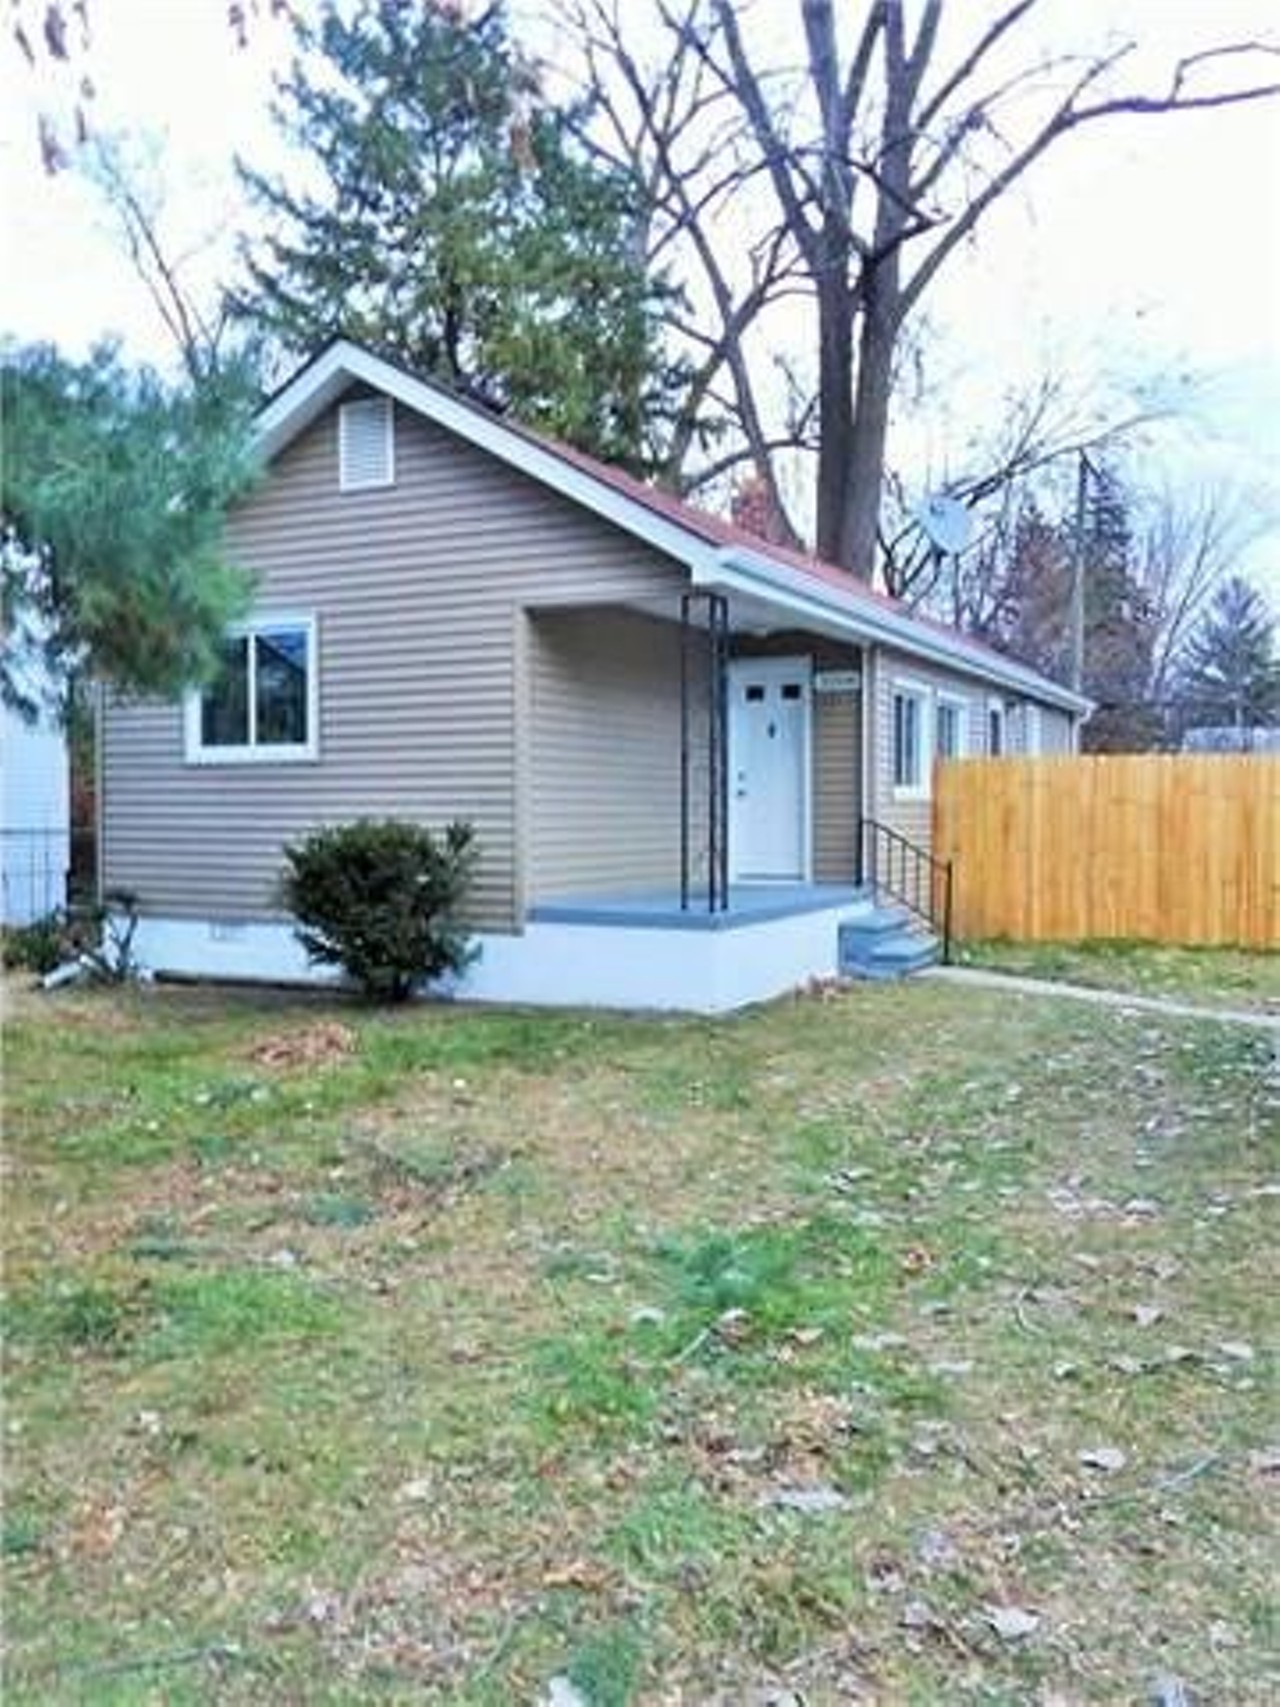 3208 Minerva St, Ferndale
$106,900
2 beds, 1 bath, 763 sq ft, 6,098 sq ft lot
We love this listing. New countertops and and the carpet looks fresh and clean. Plus, the big backyard is a great bonus.